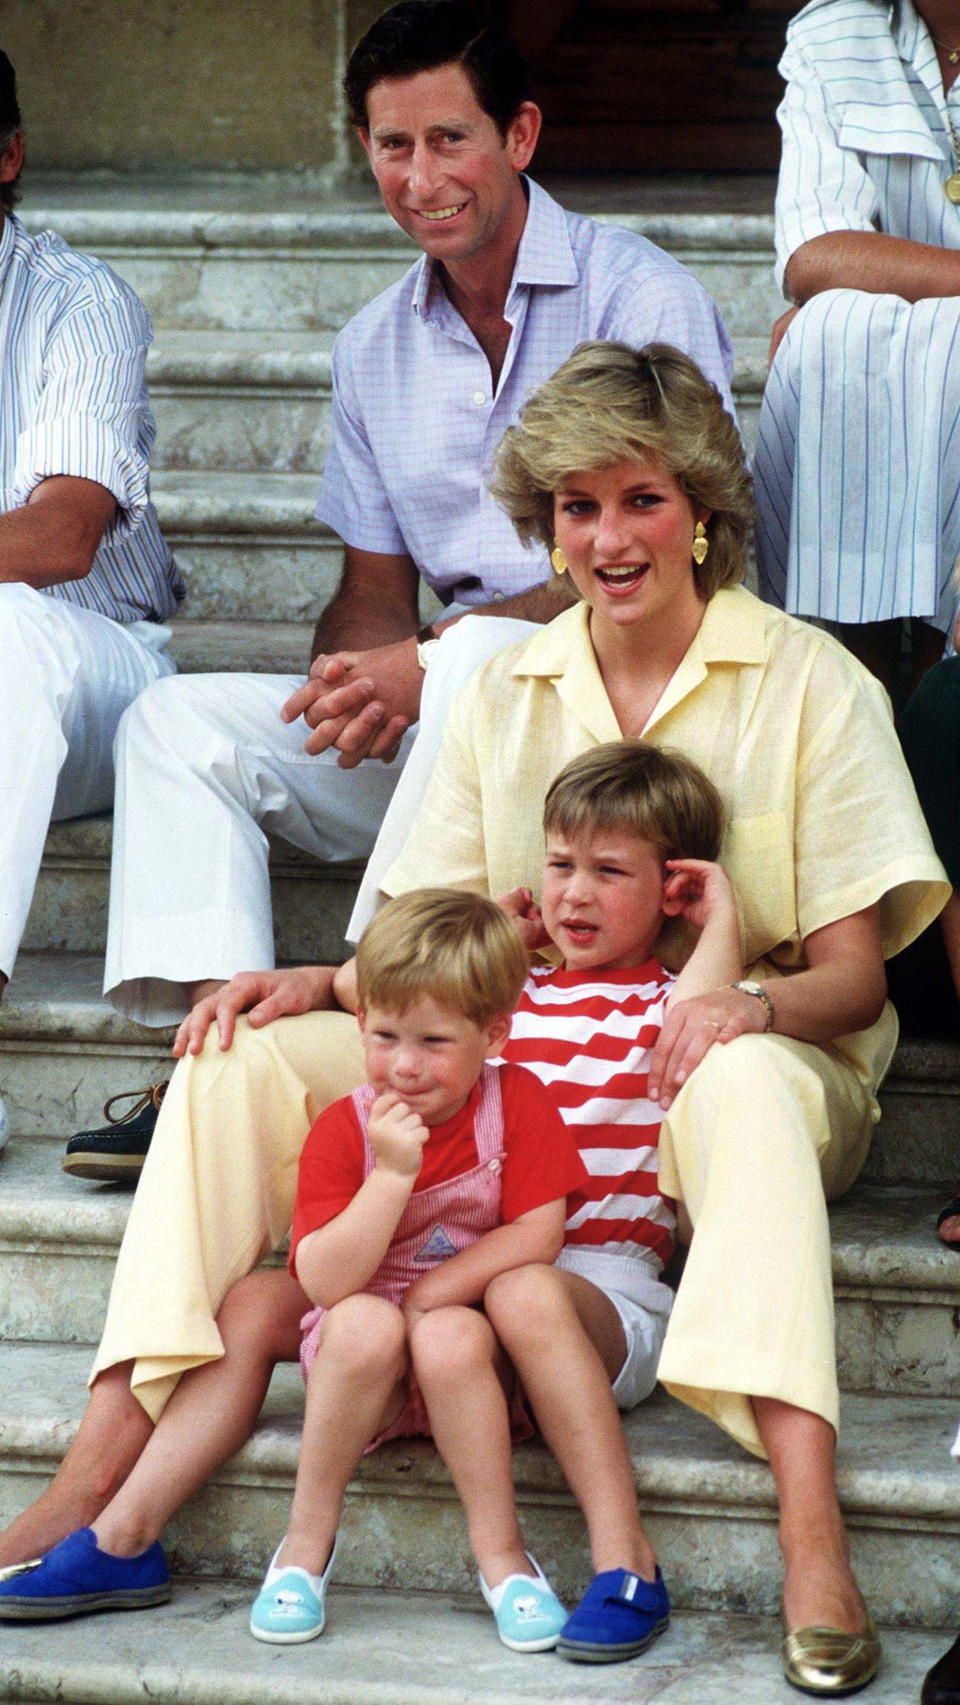 The Prince and Princess of Wales on holiday with their children, Princes William and Harry, at the Spanish royal residence Marivent Palace, August 1987. (Photo by Terry Fincher/Getty Images)